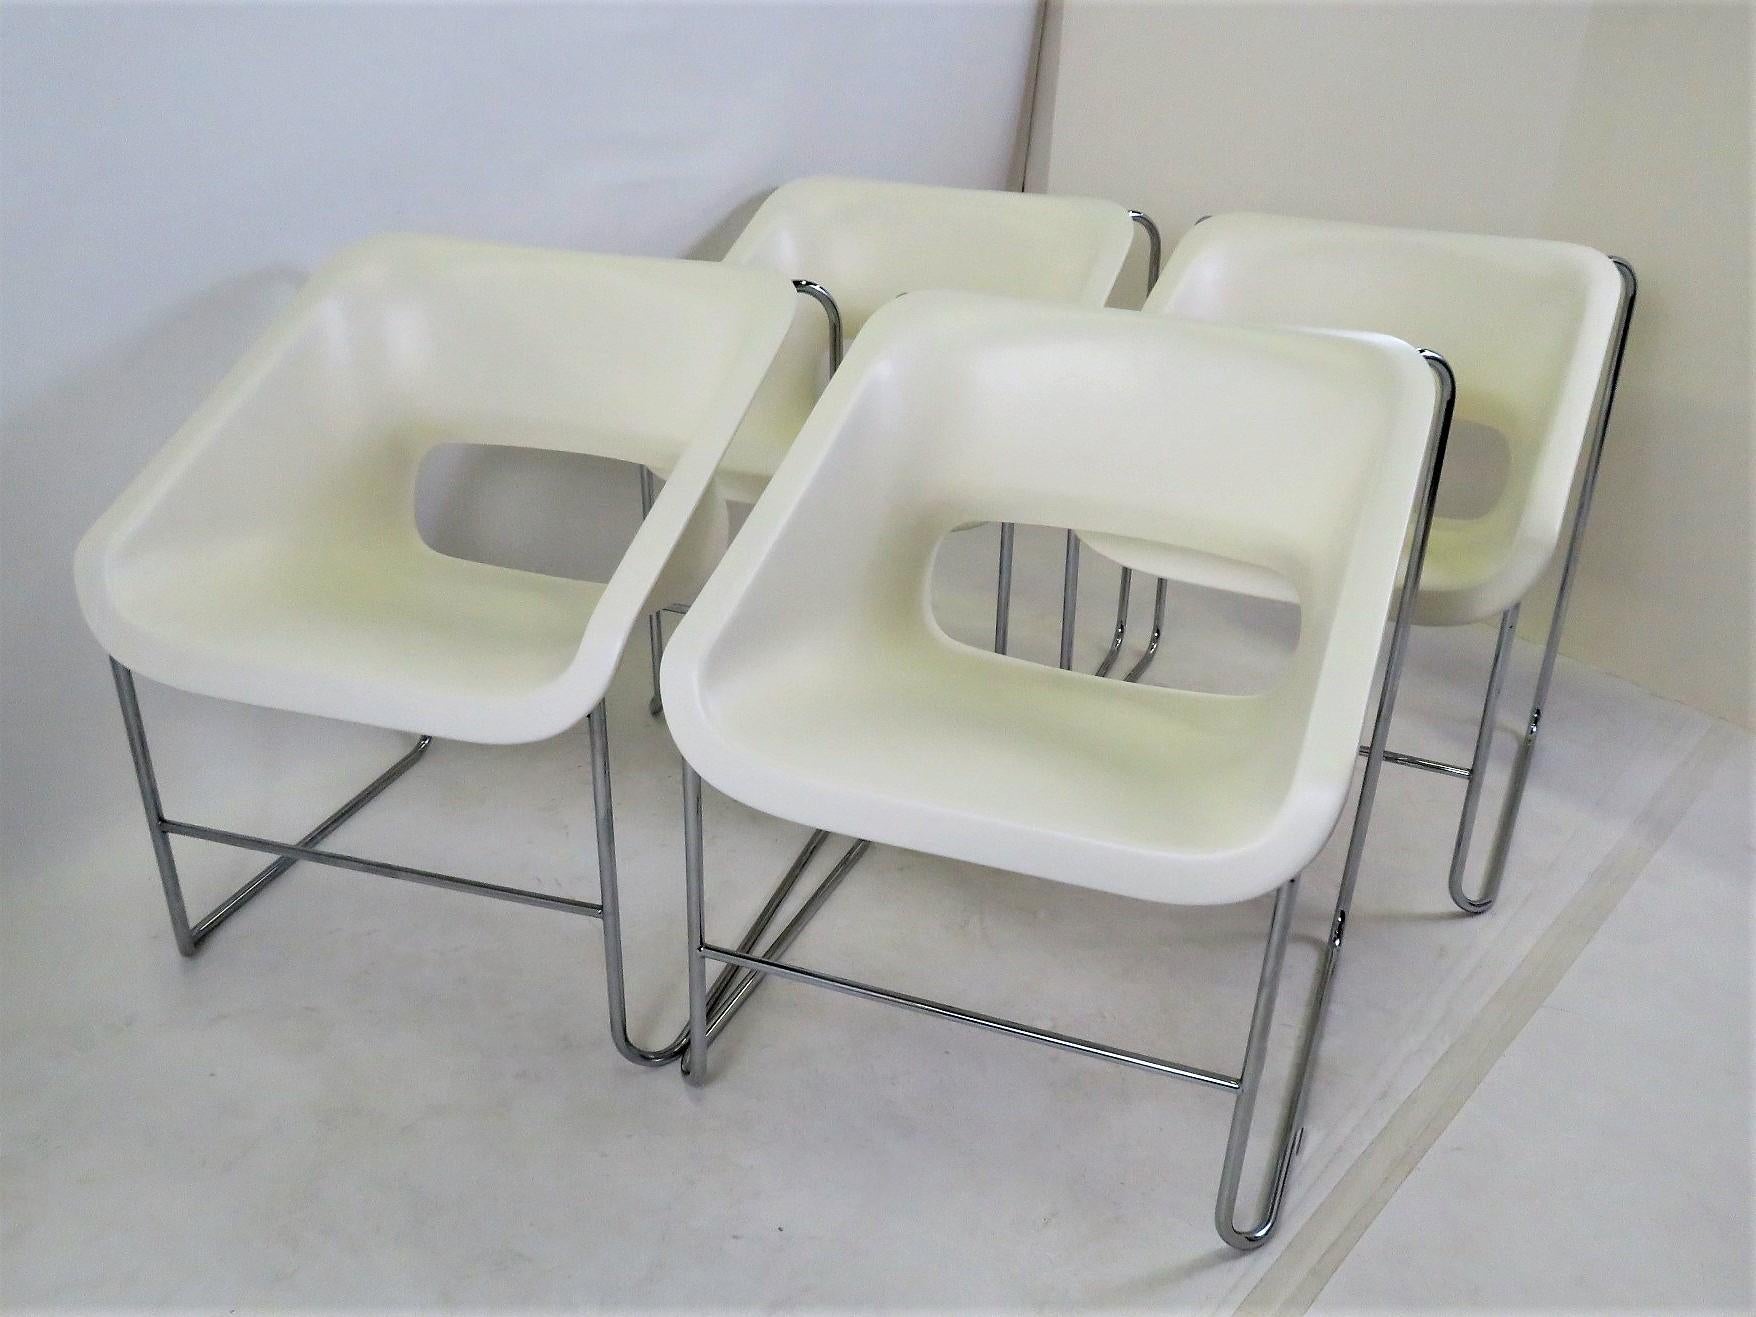 Set of 4 Space Age Mid-Century Modern armchairs created by Paul Boulva for the Montreal Olympics in 1976 and produced by Artopex of Canada. The chairs sport a chromed metal frame with molded plastic seat. They are stackable.
Stamped on bottom of